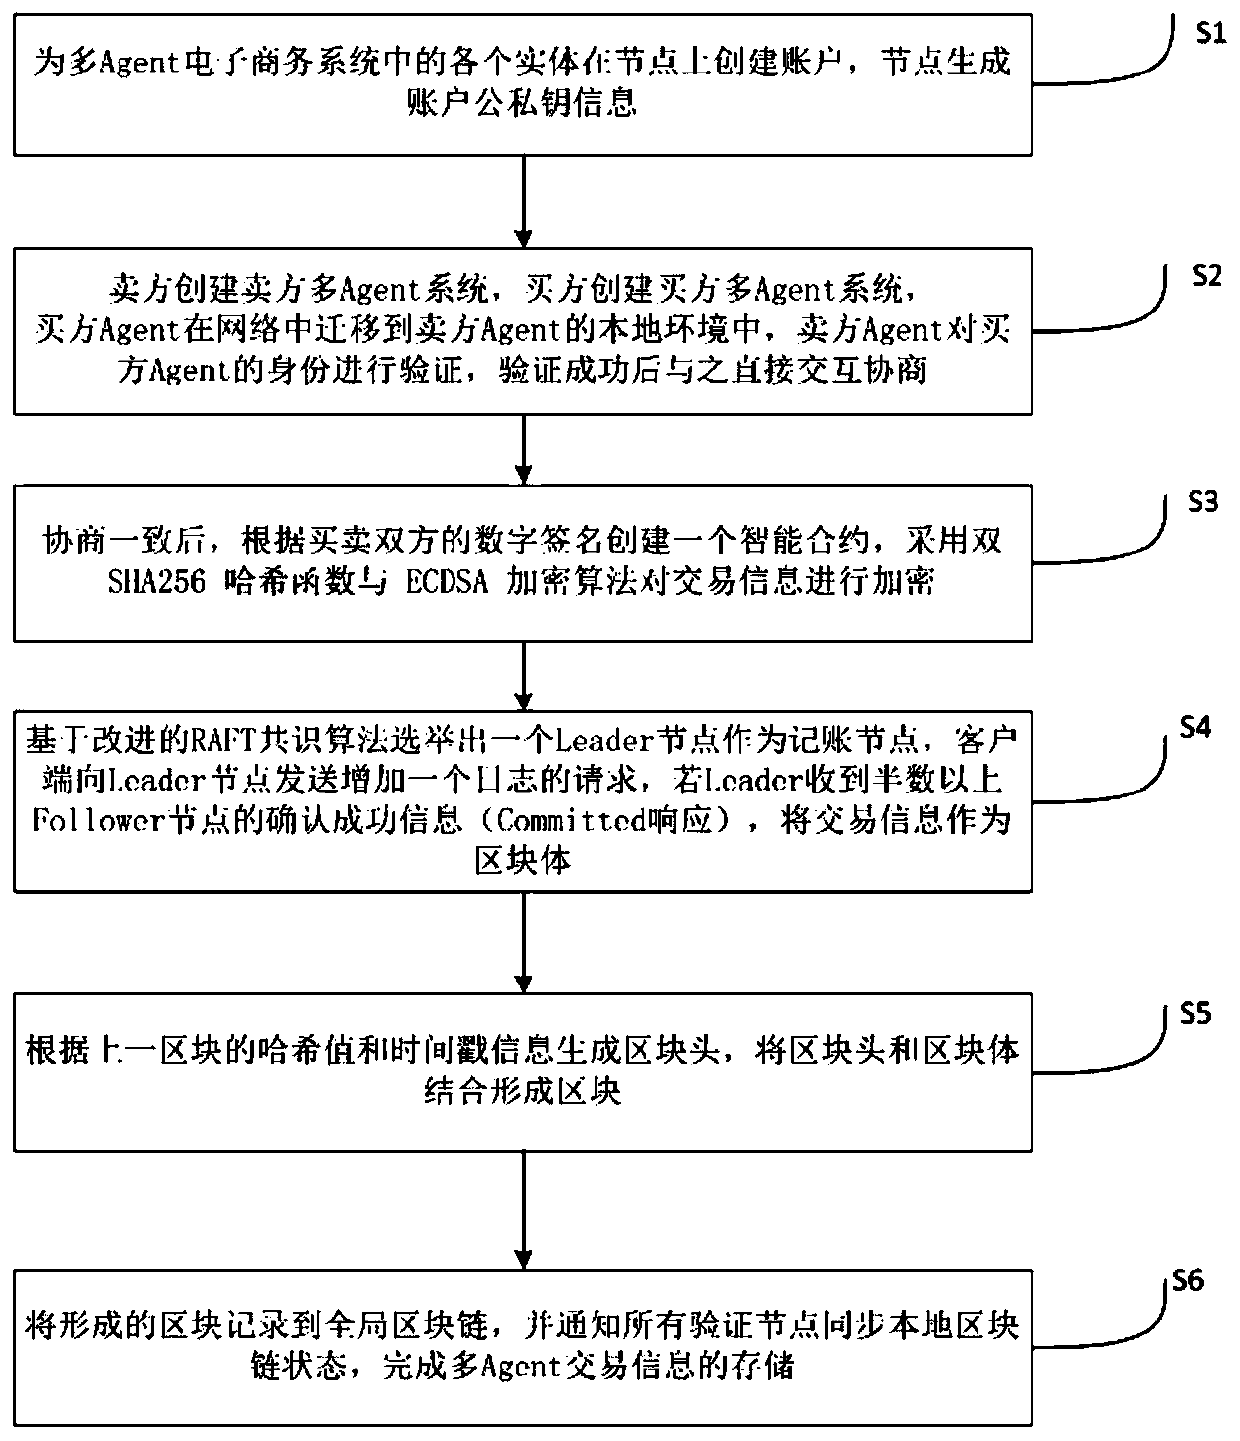 Multi-Agent transaction information protection method based on block chain technology